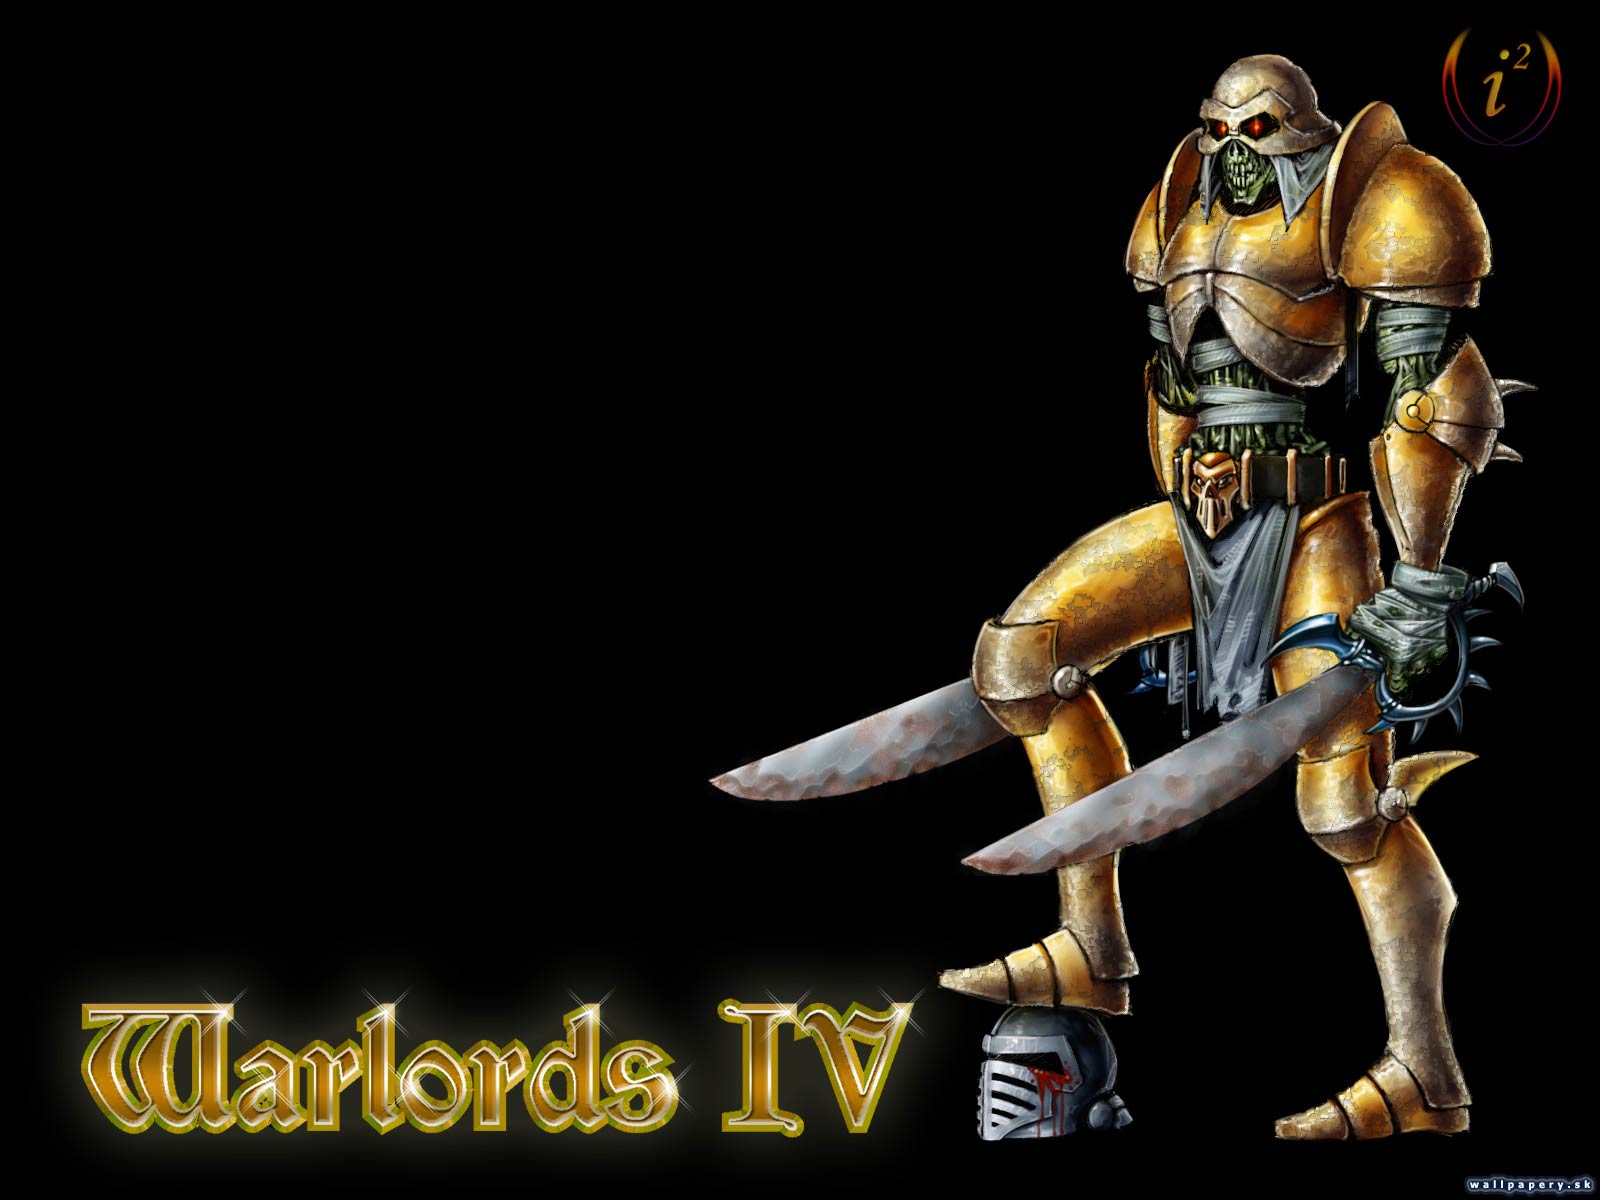 Warlords 4: Heroes of Etheria - wallpaper 3